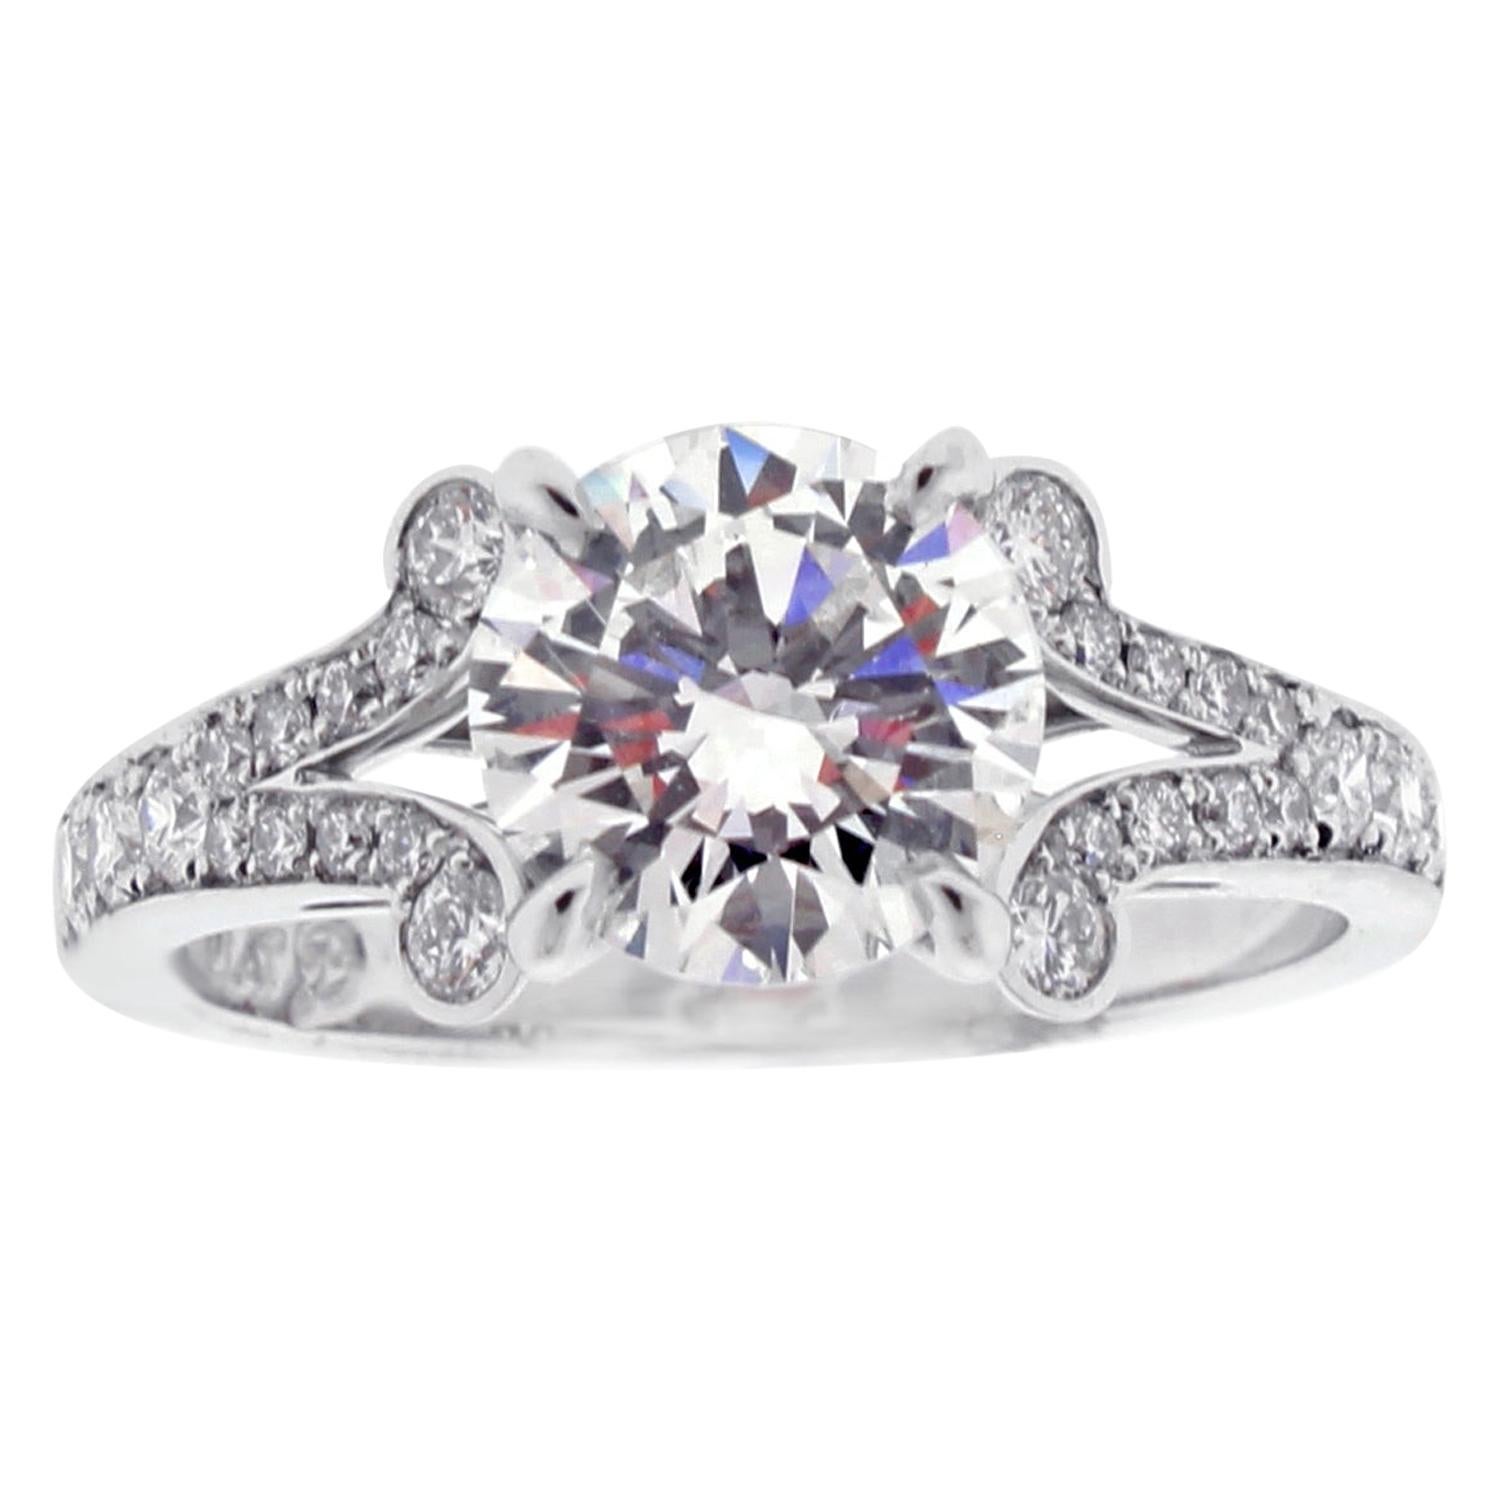 Diamond Solitaire Handmade Engagement Ring from Pampillonia For Sale